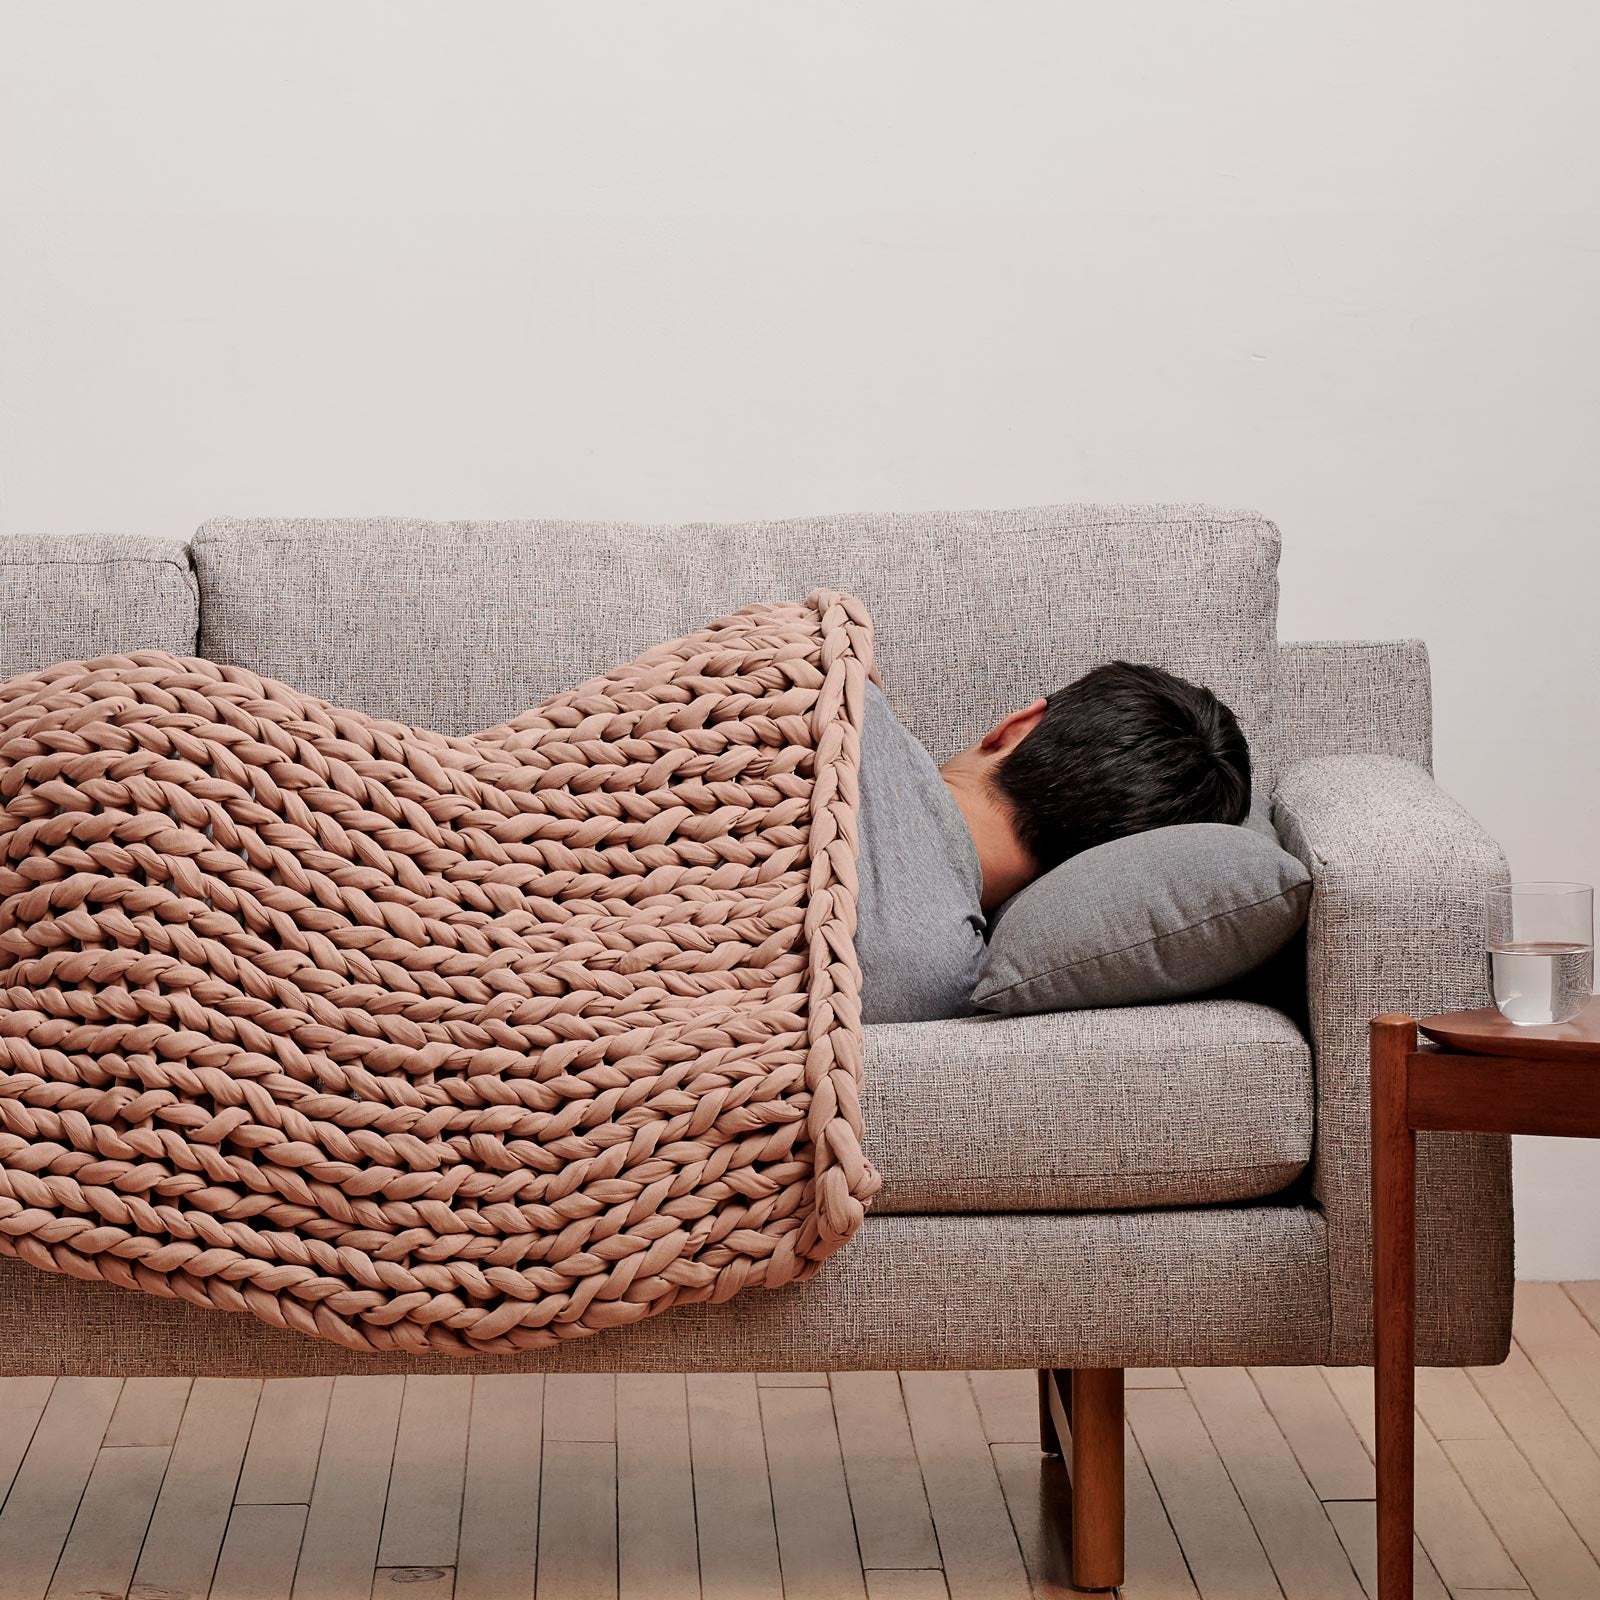 Living With Chronic Pain? A Weighted Blanket Could Be A Game-Changer.